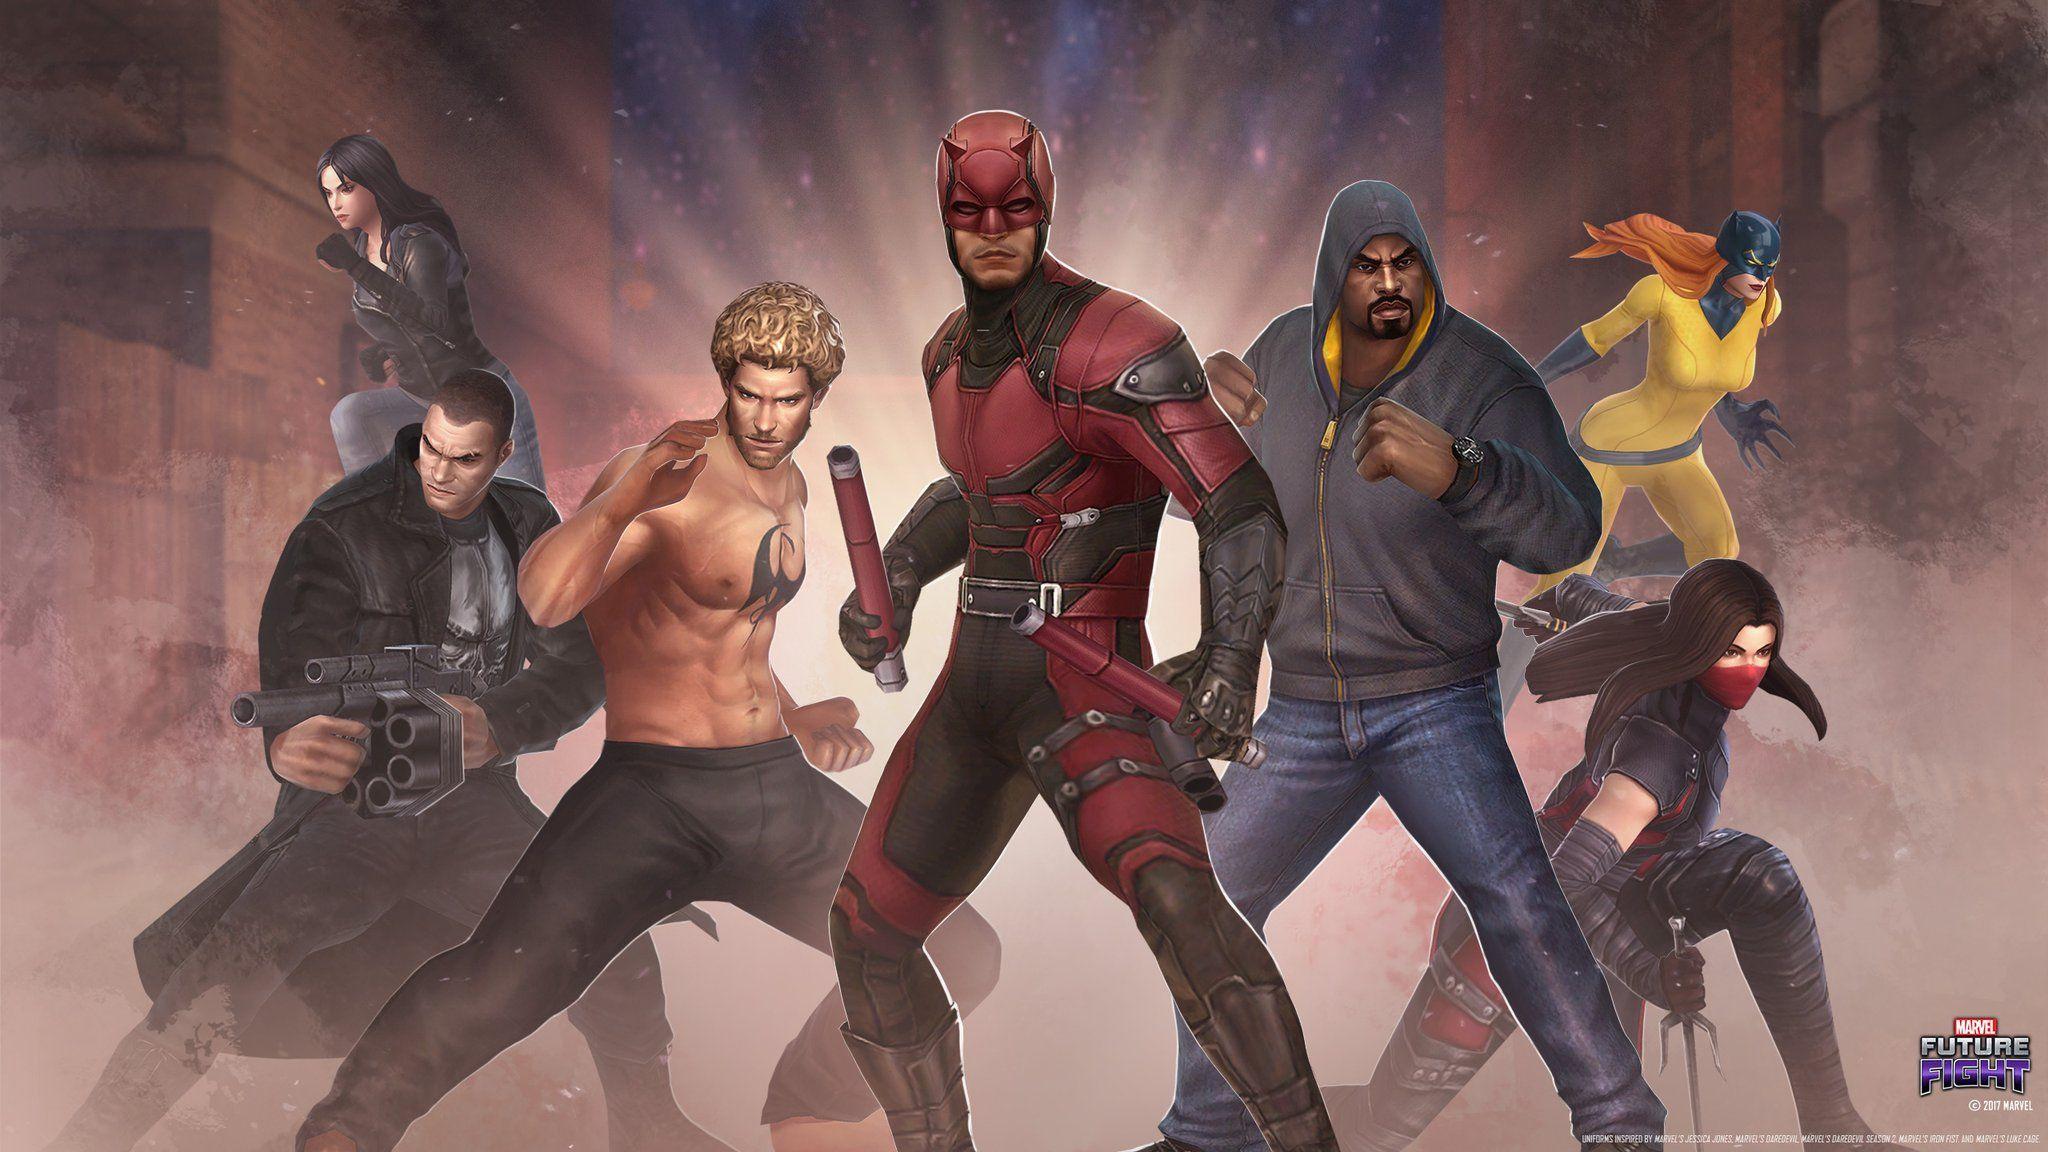 Marvel: Future Fight Defenders are here to protect